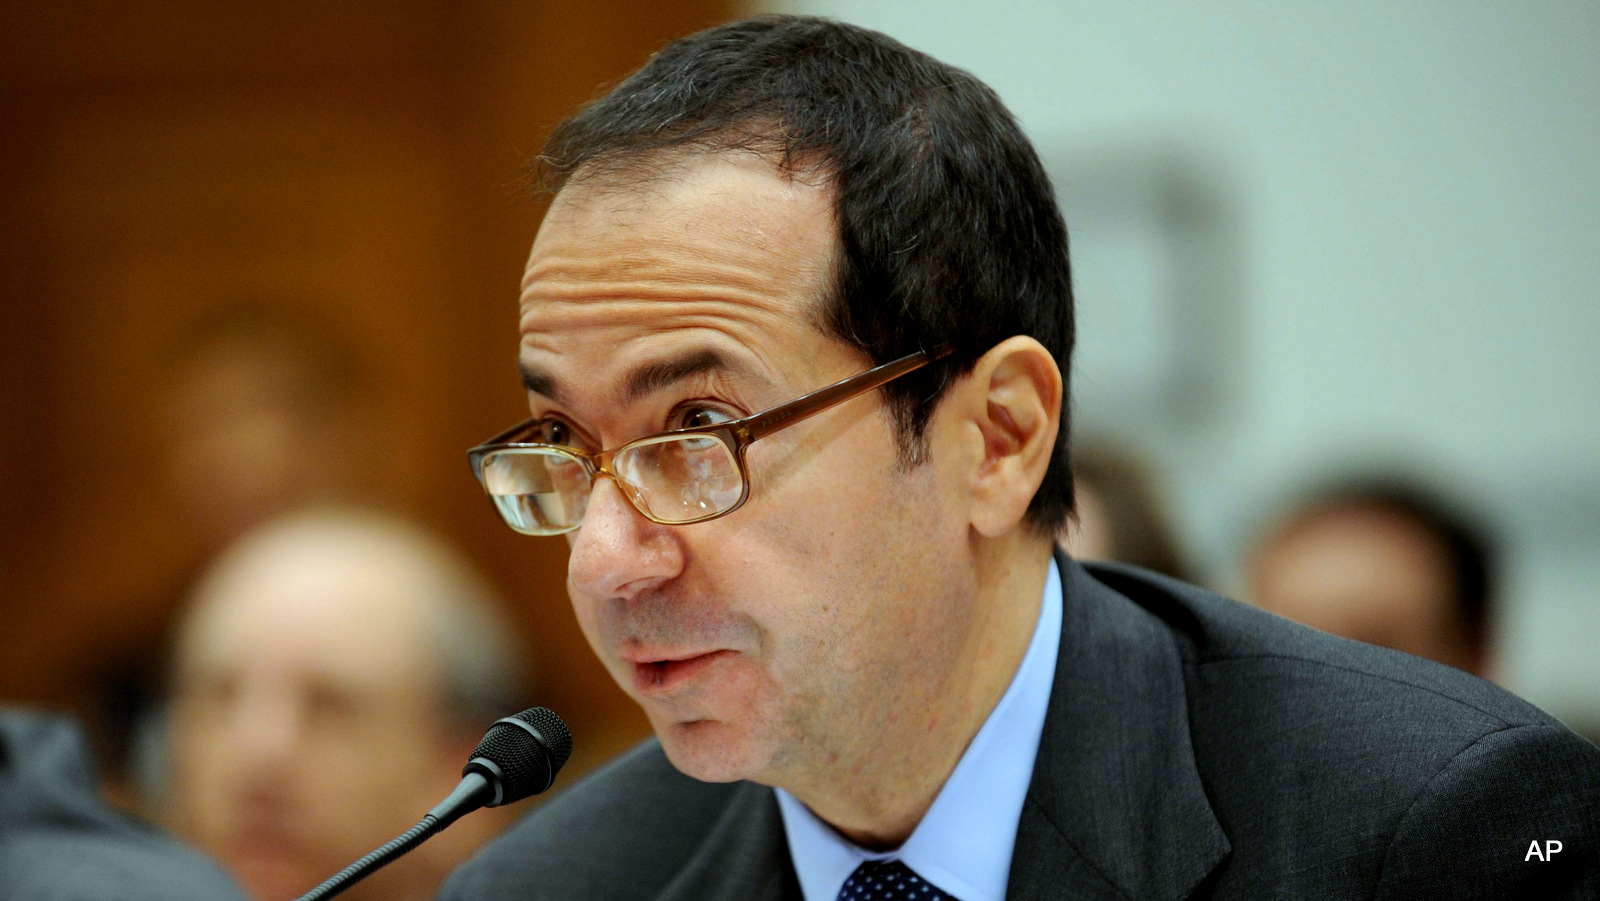 Paulson & Company, Inc. President John Alfred Paulson testifies on Capitol Hill in Washington, Thursday, Nov. 13, 2008, before the House Oversight and Government Reform Committee hearing on "Hedge Funds and the Financial Market". (AP Photo/Kevin Wolf)